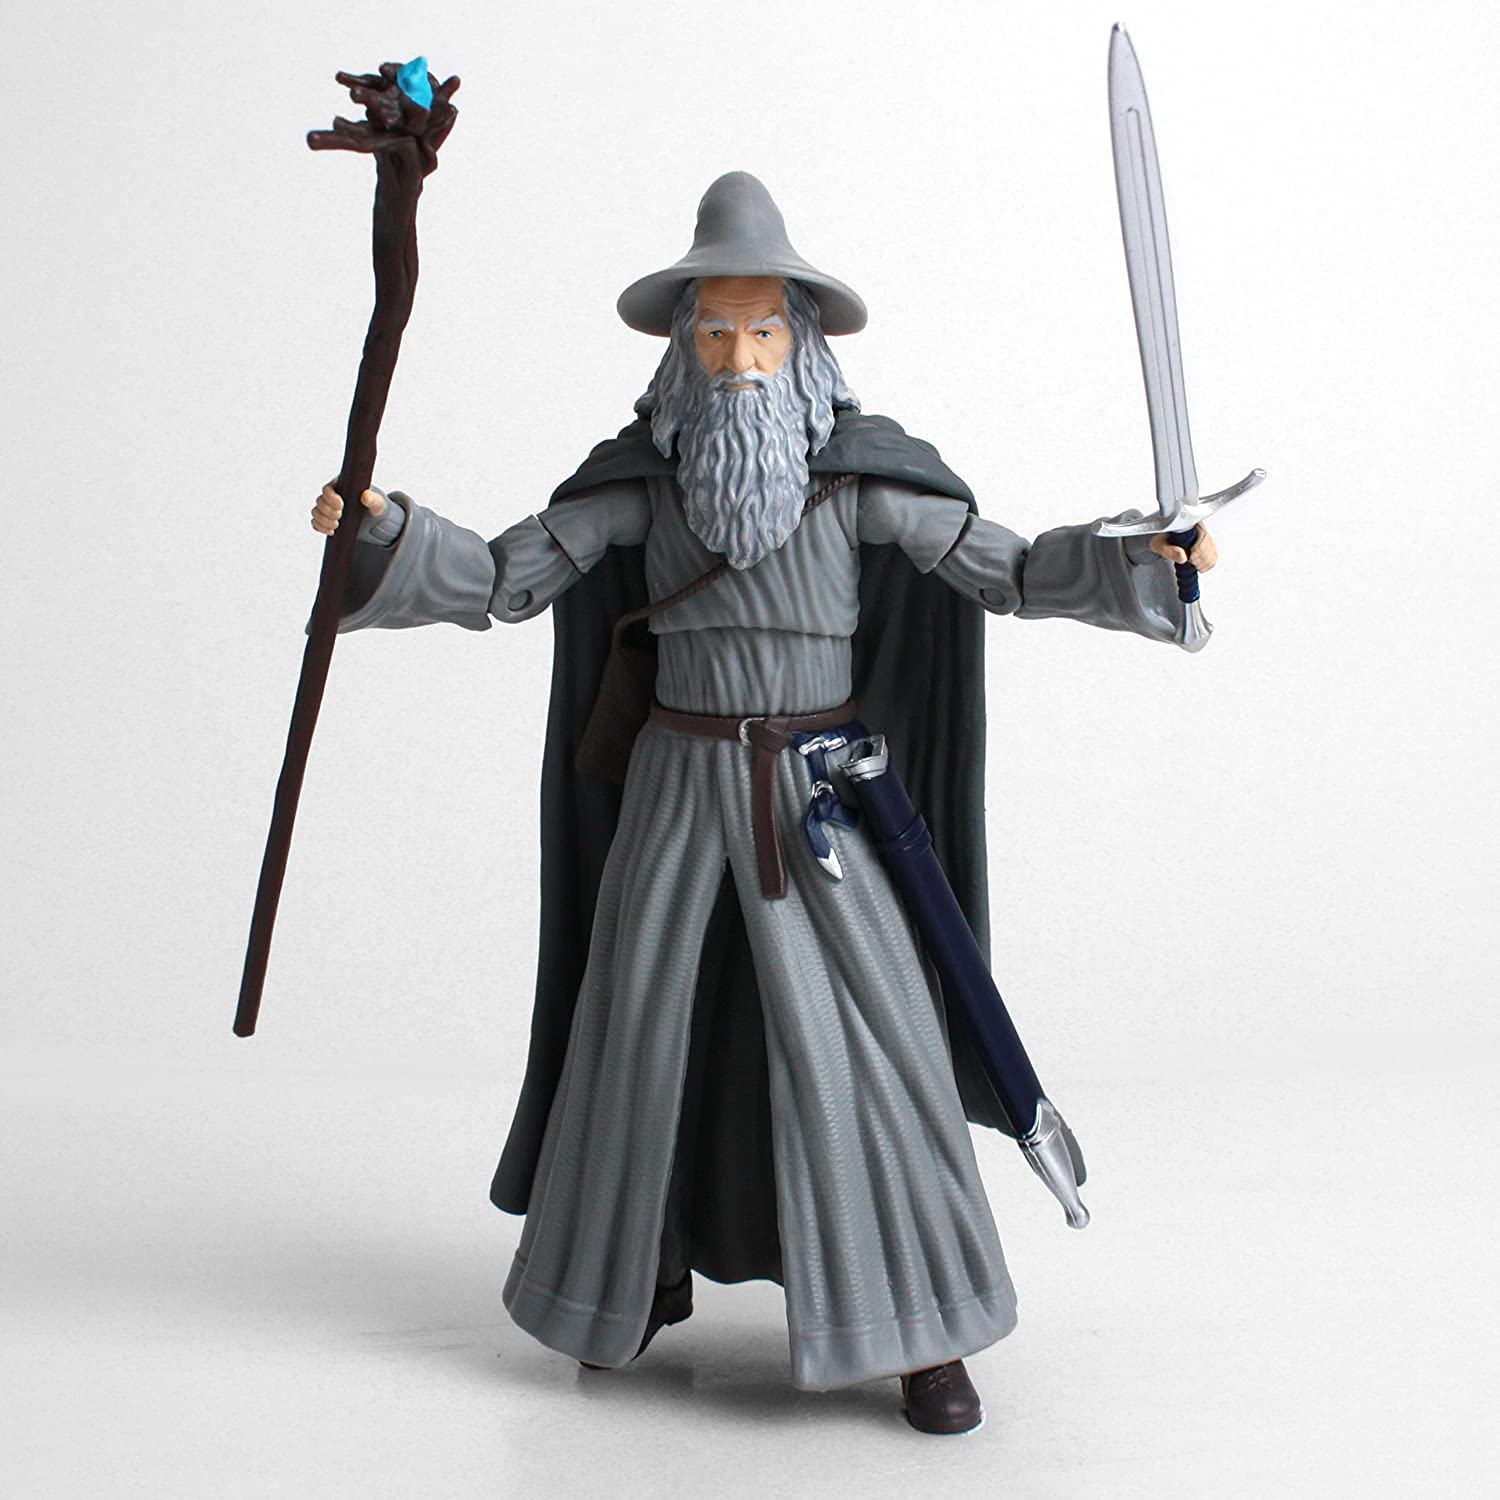 BST AXN Gandalf 13cm - The Lord of the Rings